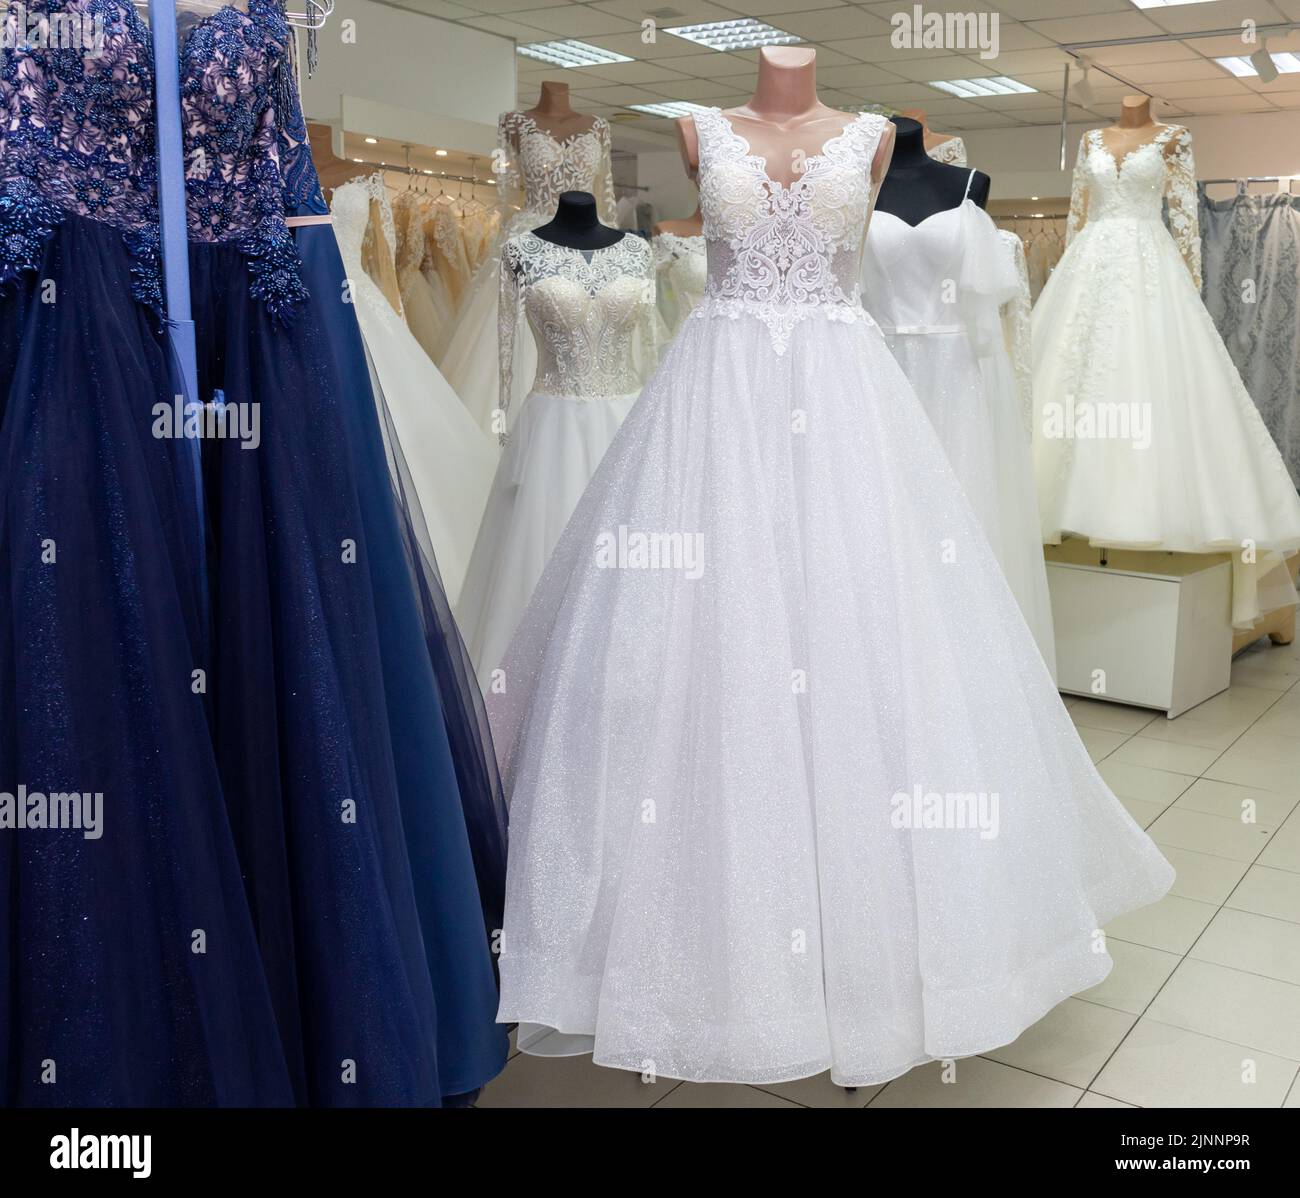 Many different wedding dresses in the bridal shop Stock Photo